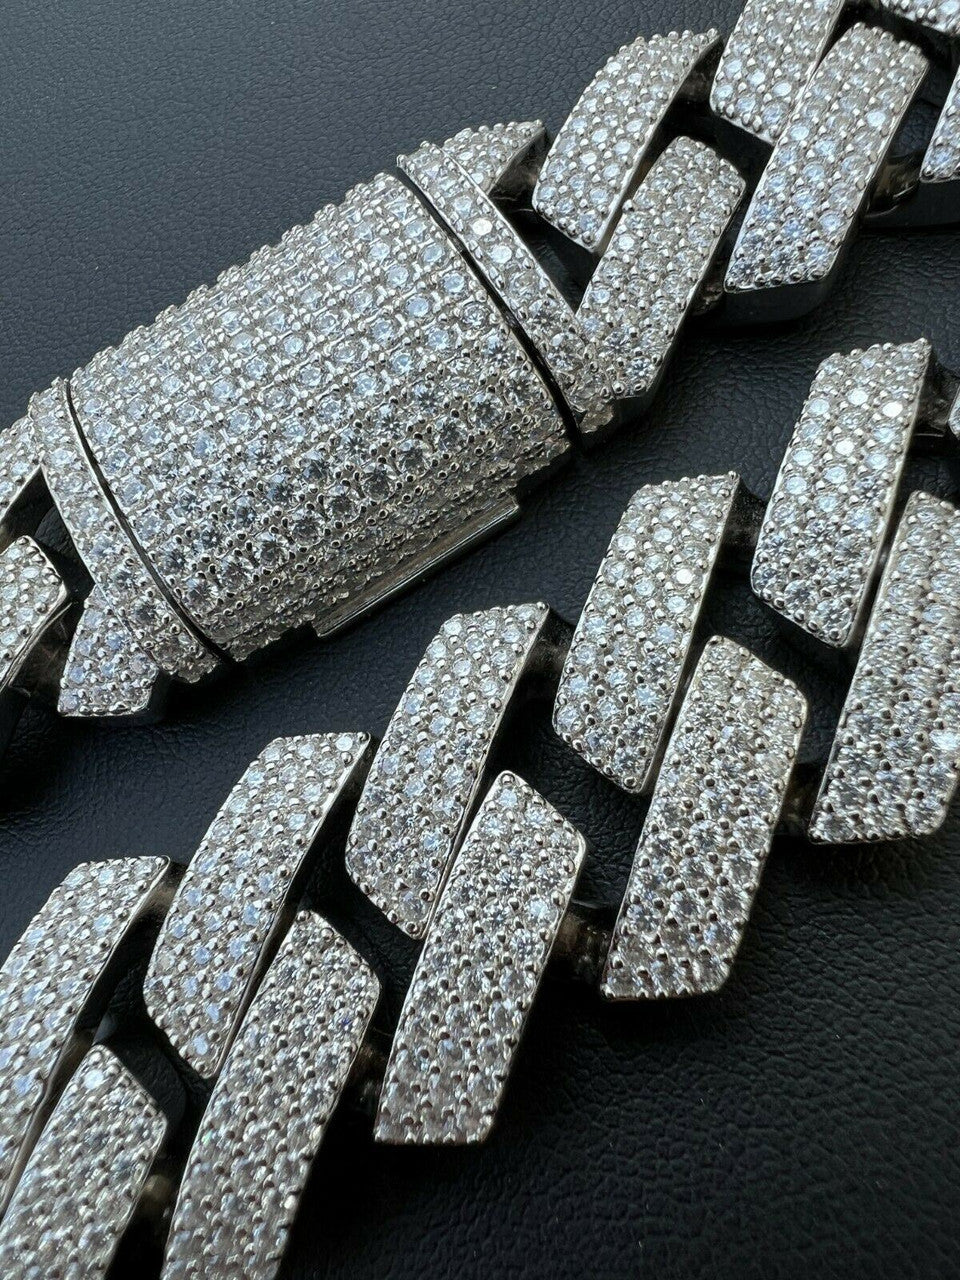 22mm White Gold Iced Prong Miami Cuban Link Chain Vvs Moissanite 925 Sterling Silver Necklace